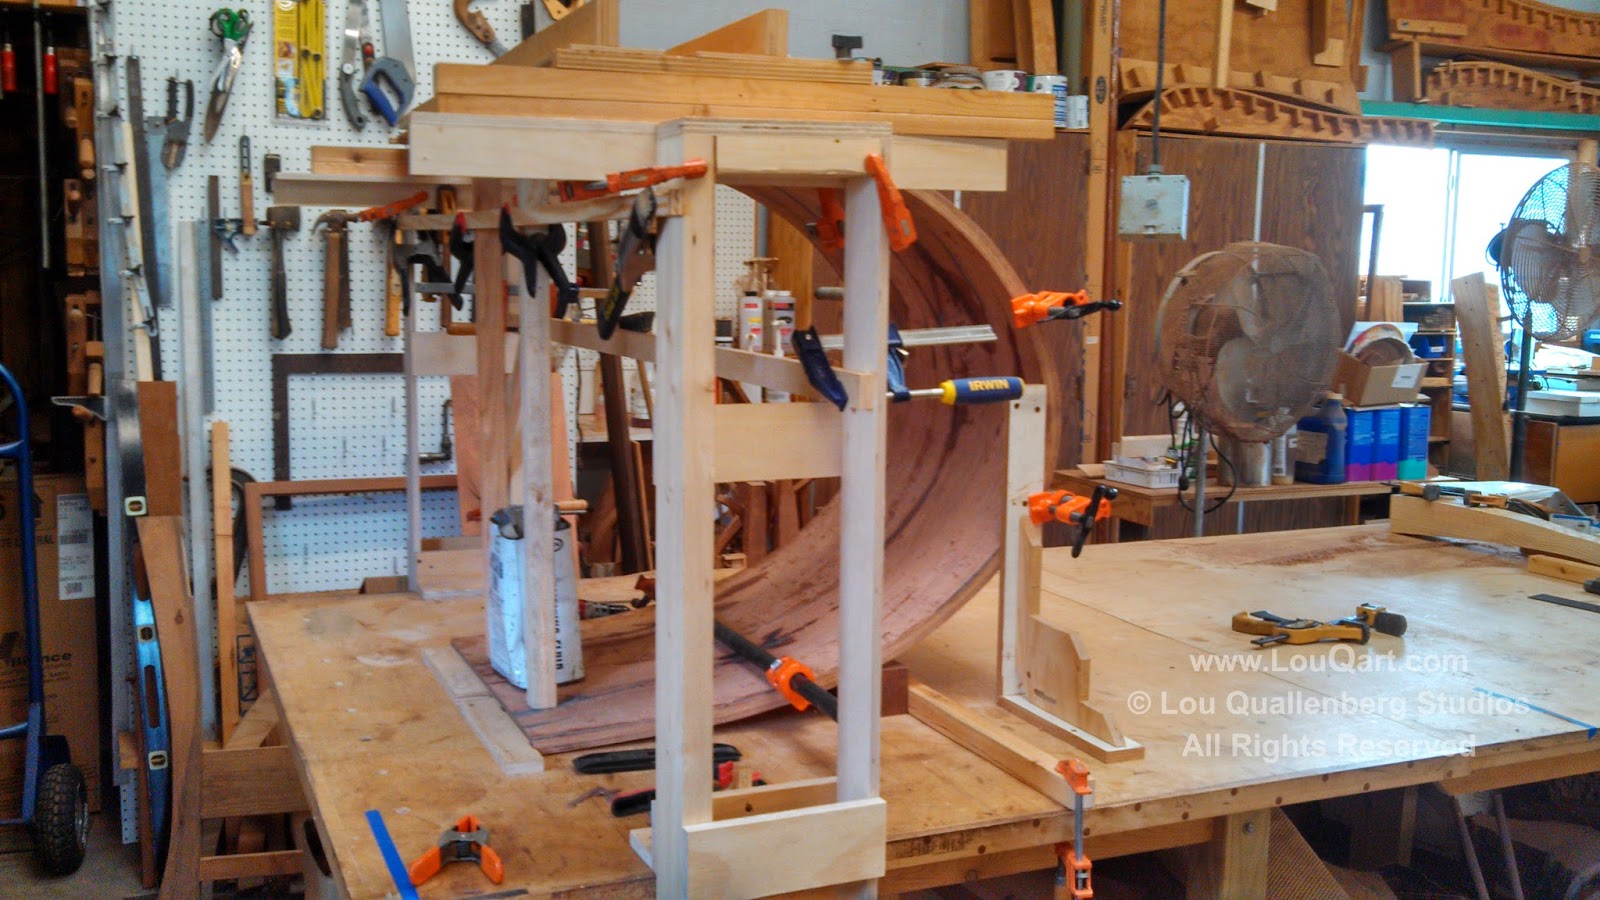 Base Jig for laminated mesquite curves by Lou Qualleneberg